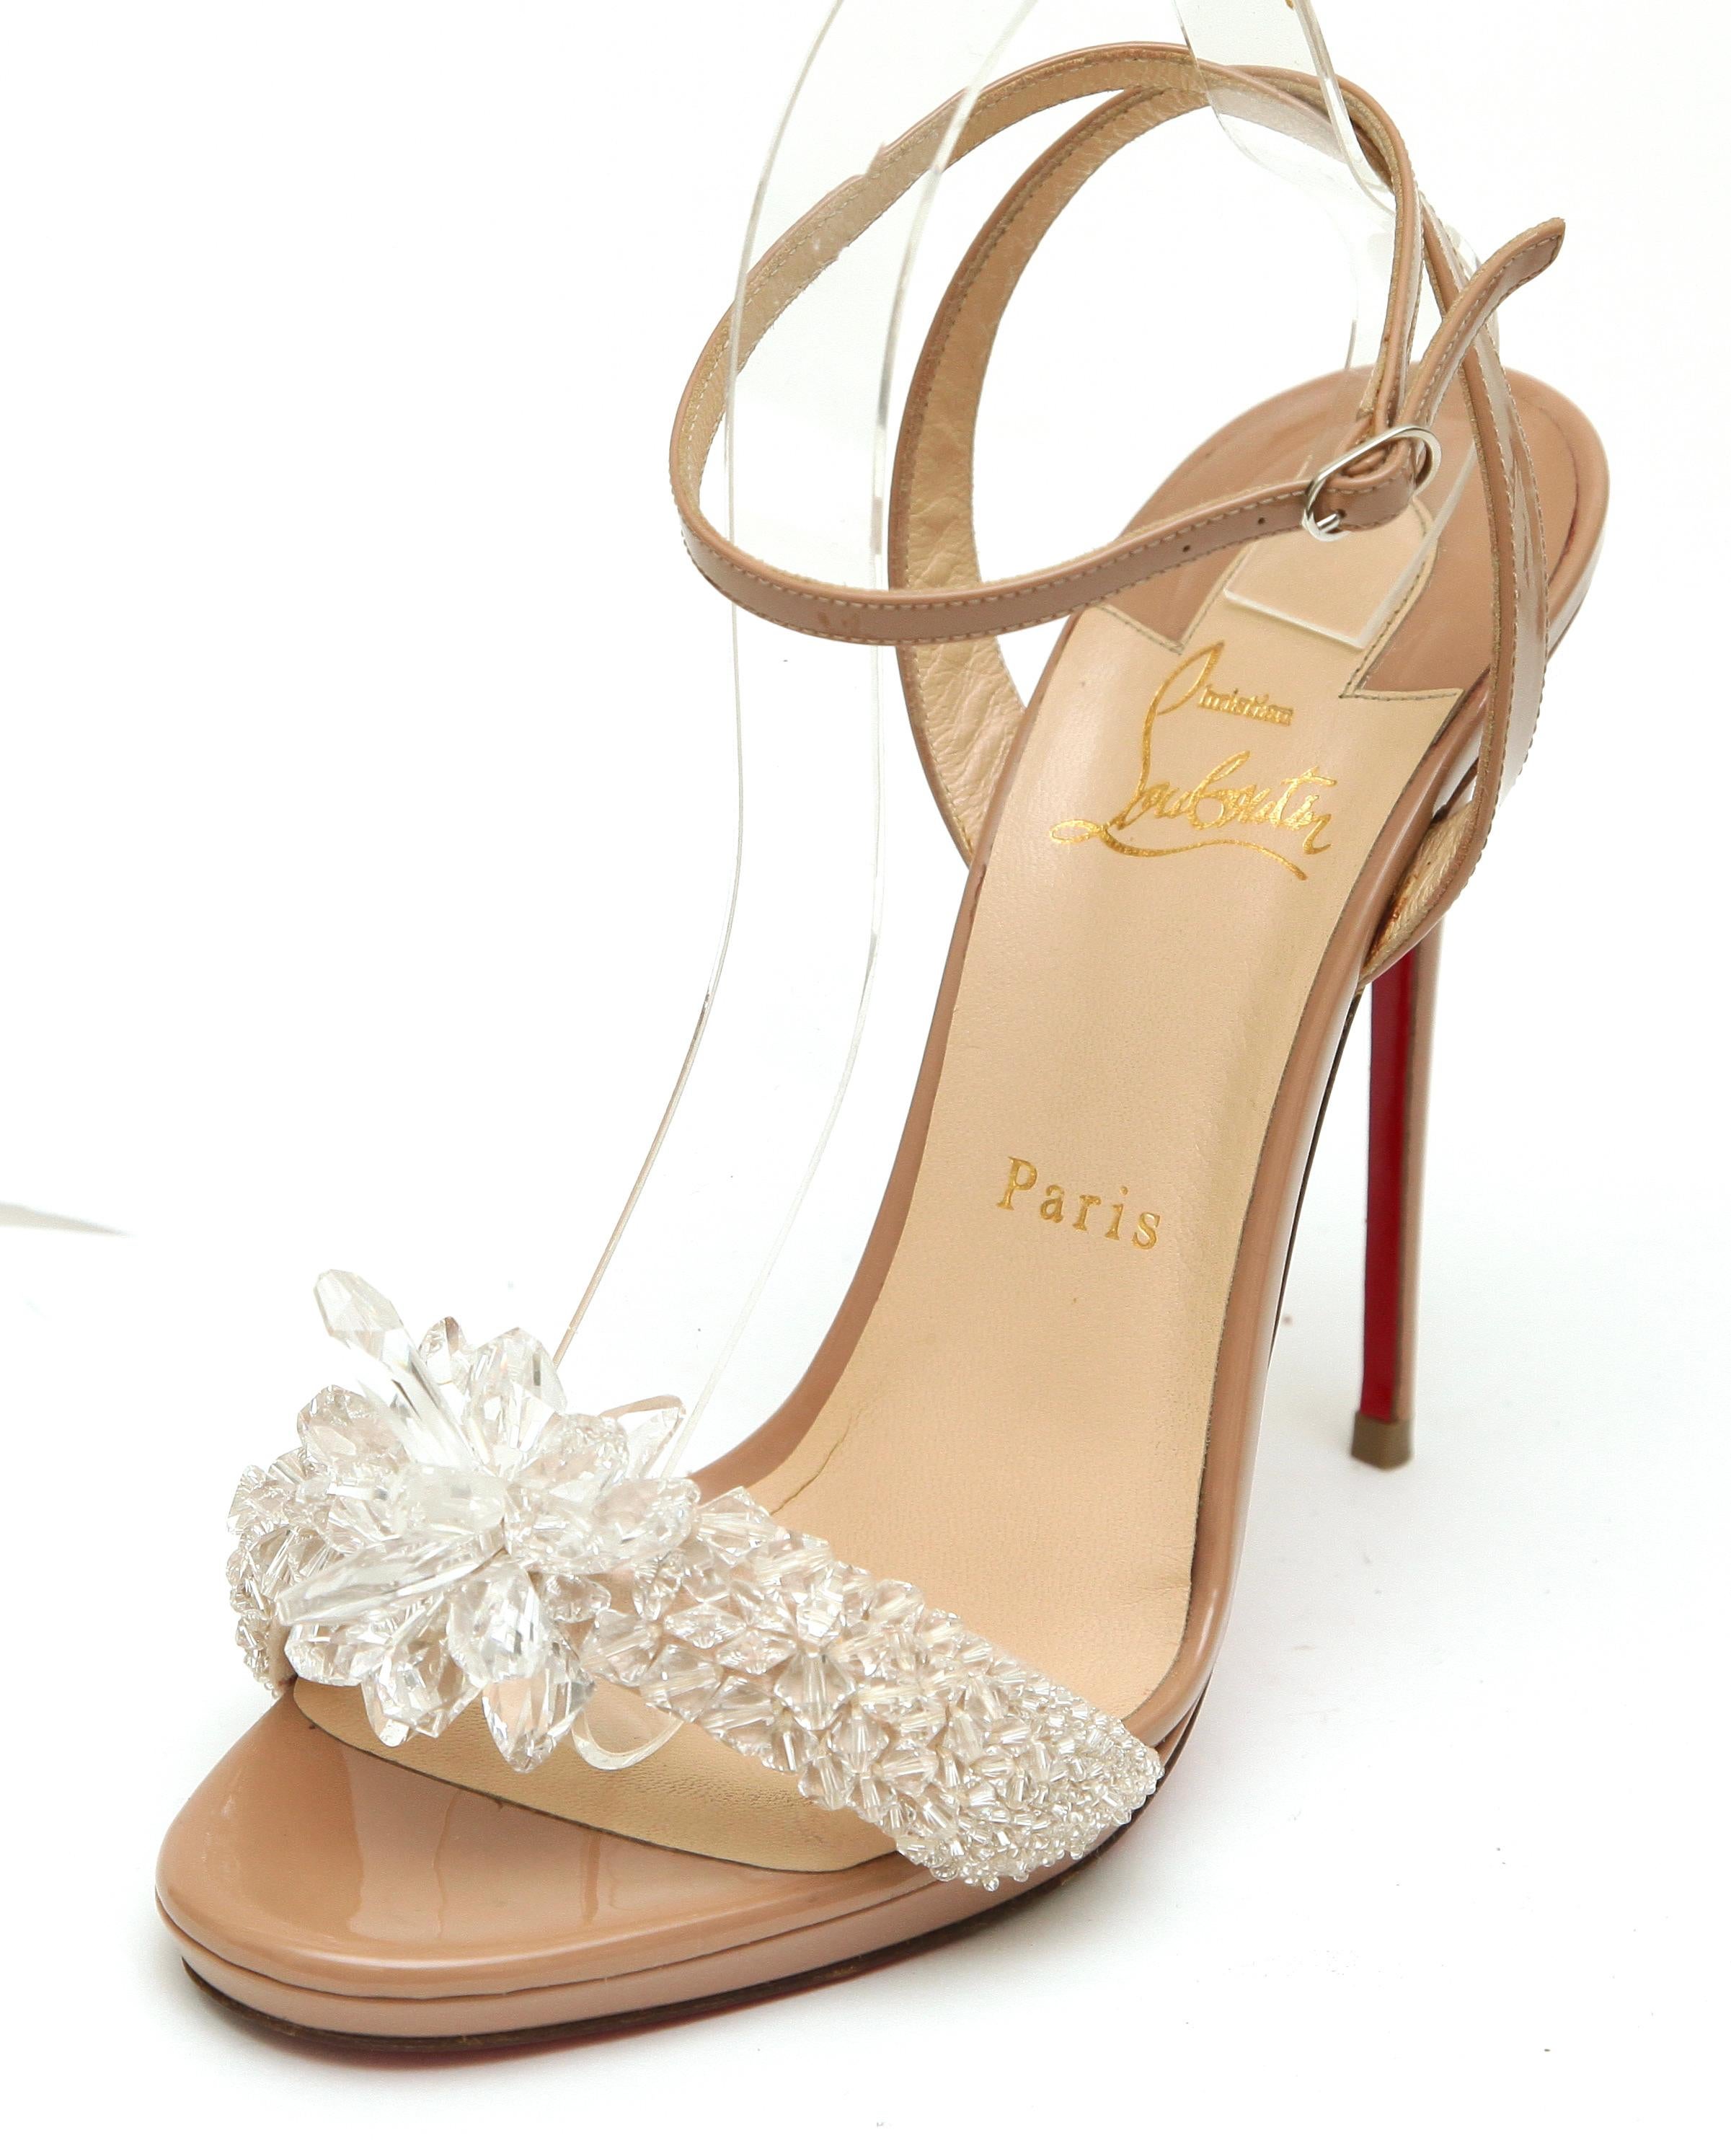 CHRISTIAN LOUBOUTIN Patent Leather Sandal CRYSTAL QUEEN Heel Ankle Strap 39 In Good Condition For Sale In Hollywood, FL